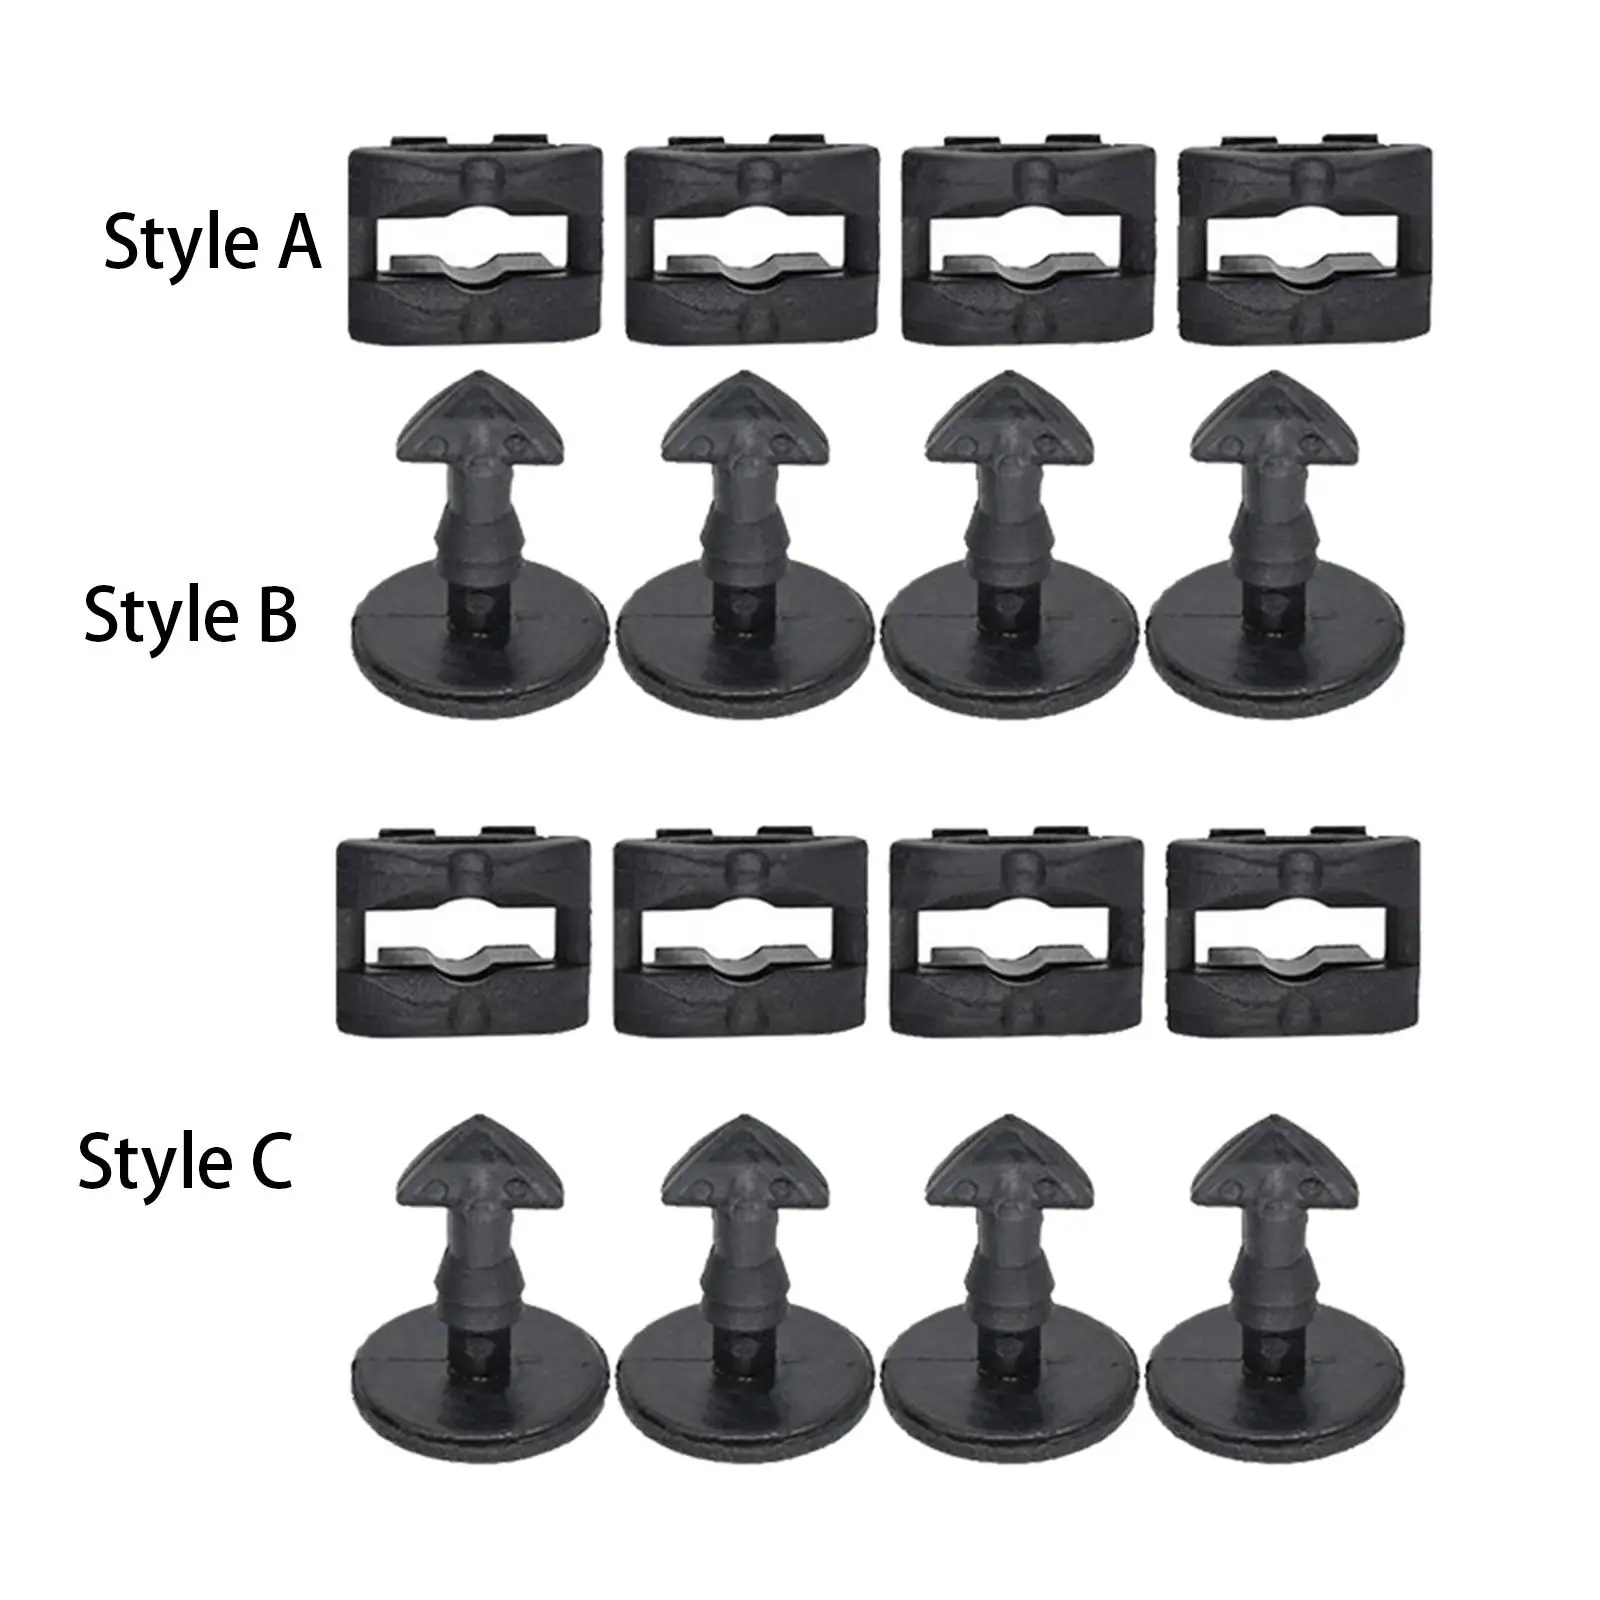 4Pcs Tow Eye Cover Clips Retainers Eye Dyr500010 for Discovery 3 2 Car Accessories Easy to Install